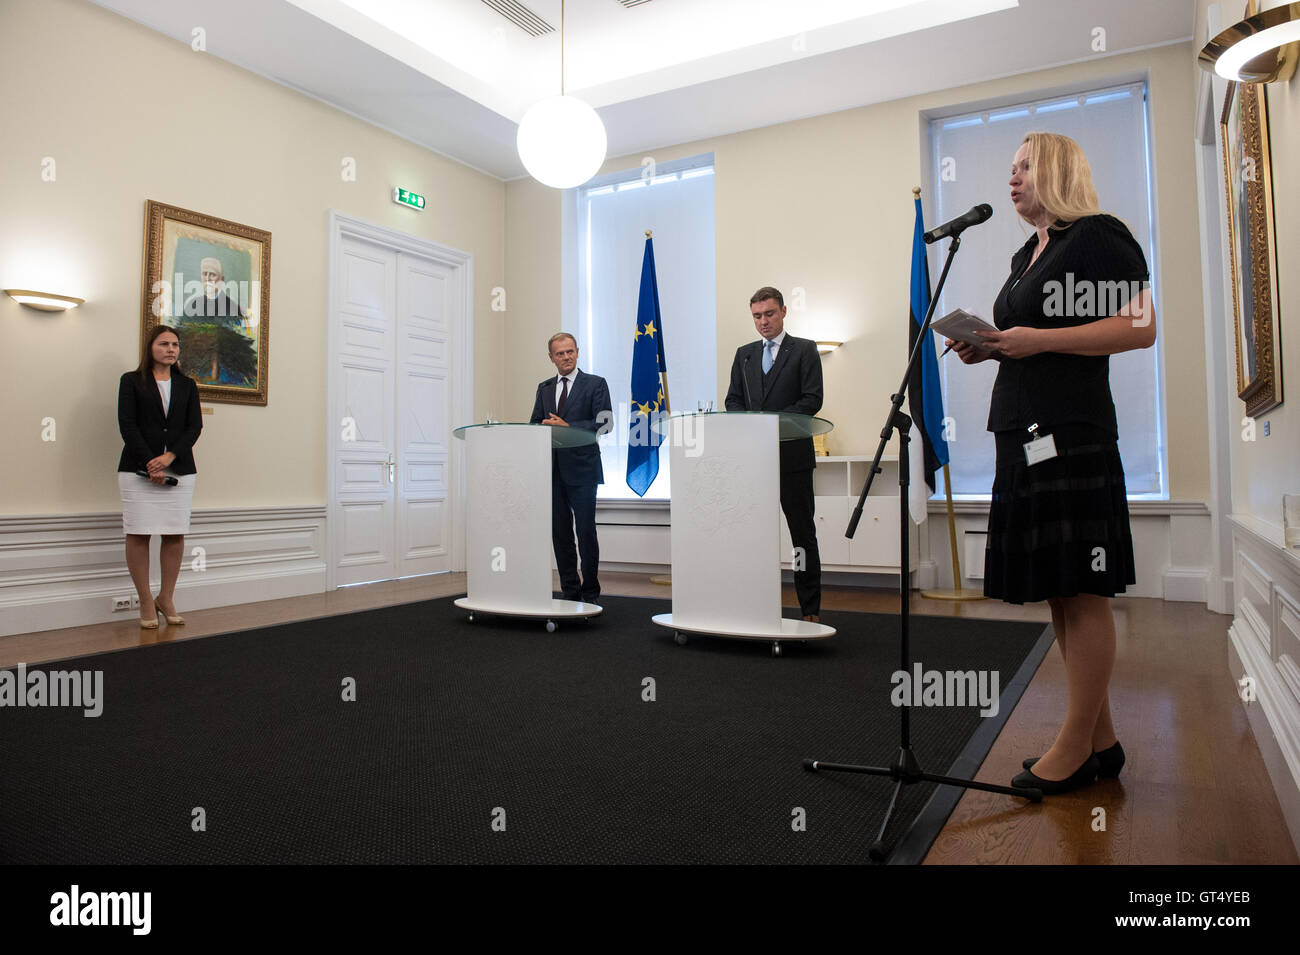 Tallinn, Estonia, 9th September 2016. Estonian Prime Minister Taavi Roivas (R) and President of the European Council Donald Tusk (L) adresses the media after their meeting at Steenbok House. The main topics of their meeting will be the future of the European Union after the Brexit   as well as the Estonian politic situation regarding the Presidential election.  Estonia will host the the Presidency of the Council of the European Union in the second half of 2017, this for the first time. Credit:  Nicolas Bouvy/Alamy Live News Stock Photo